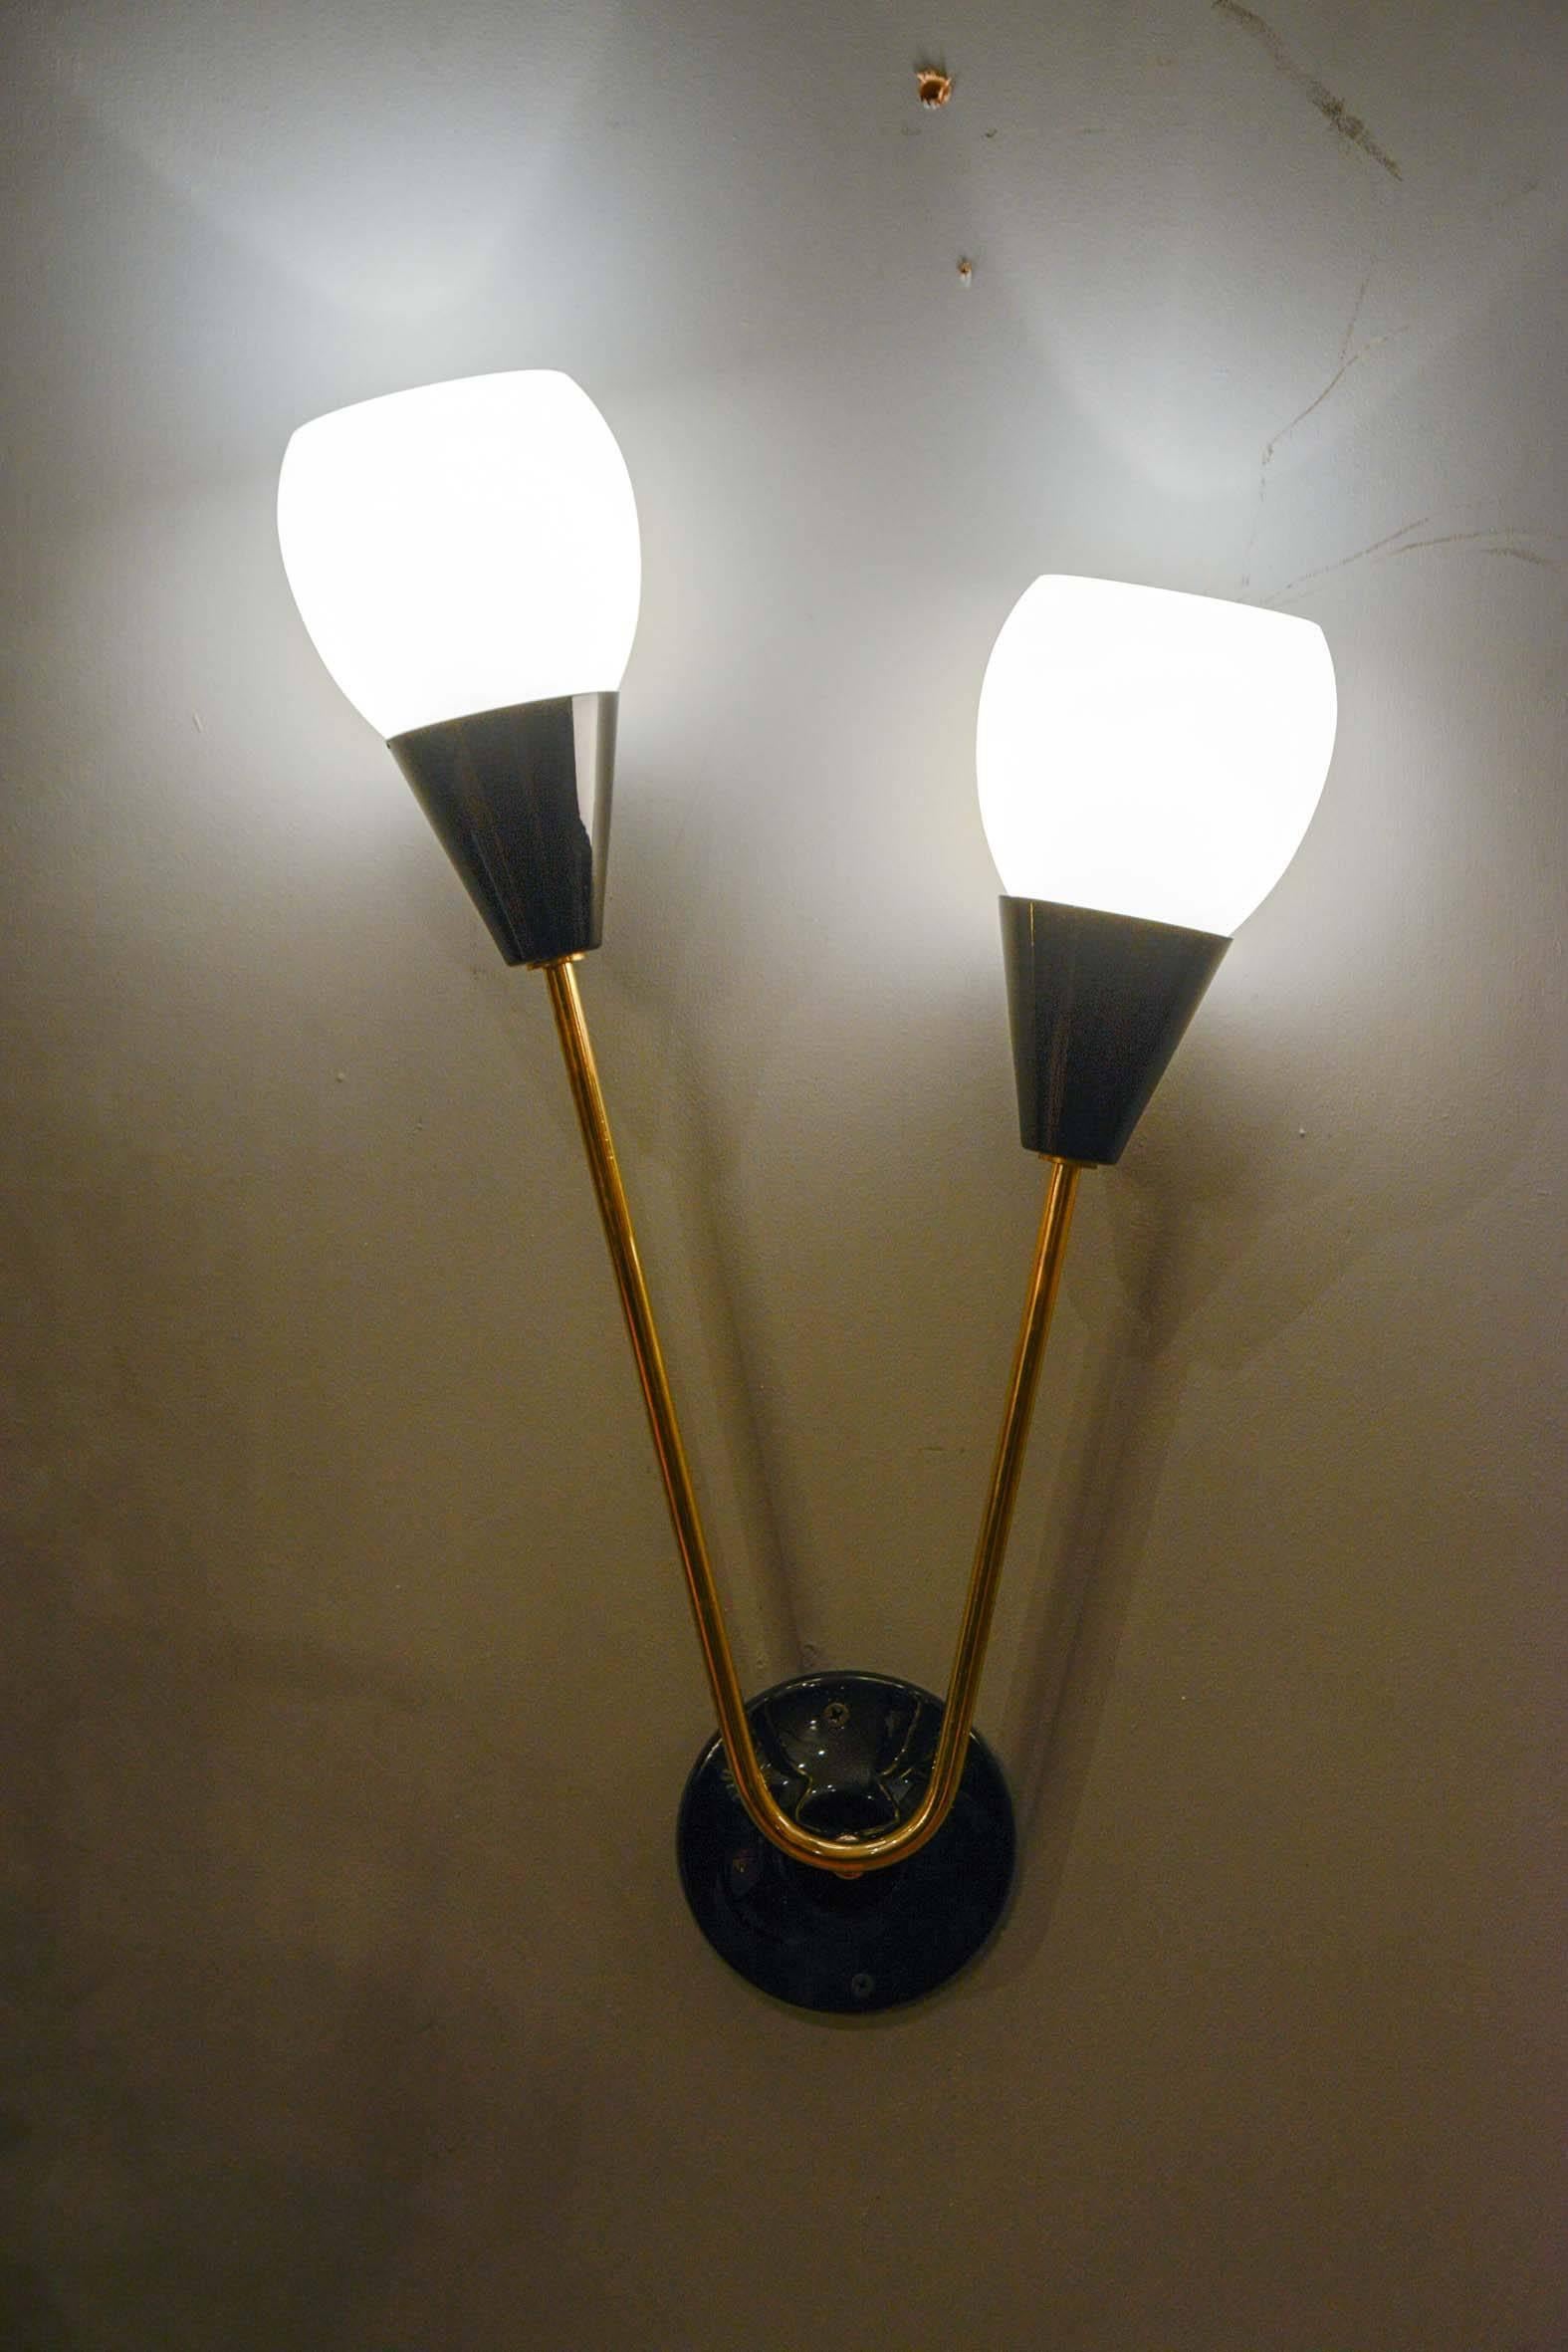 Set of four sconces with two lights per sconce, black metal, brass and white globe.